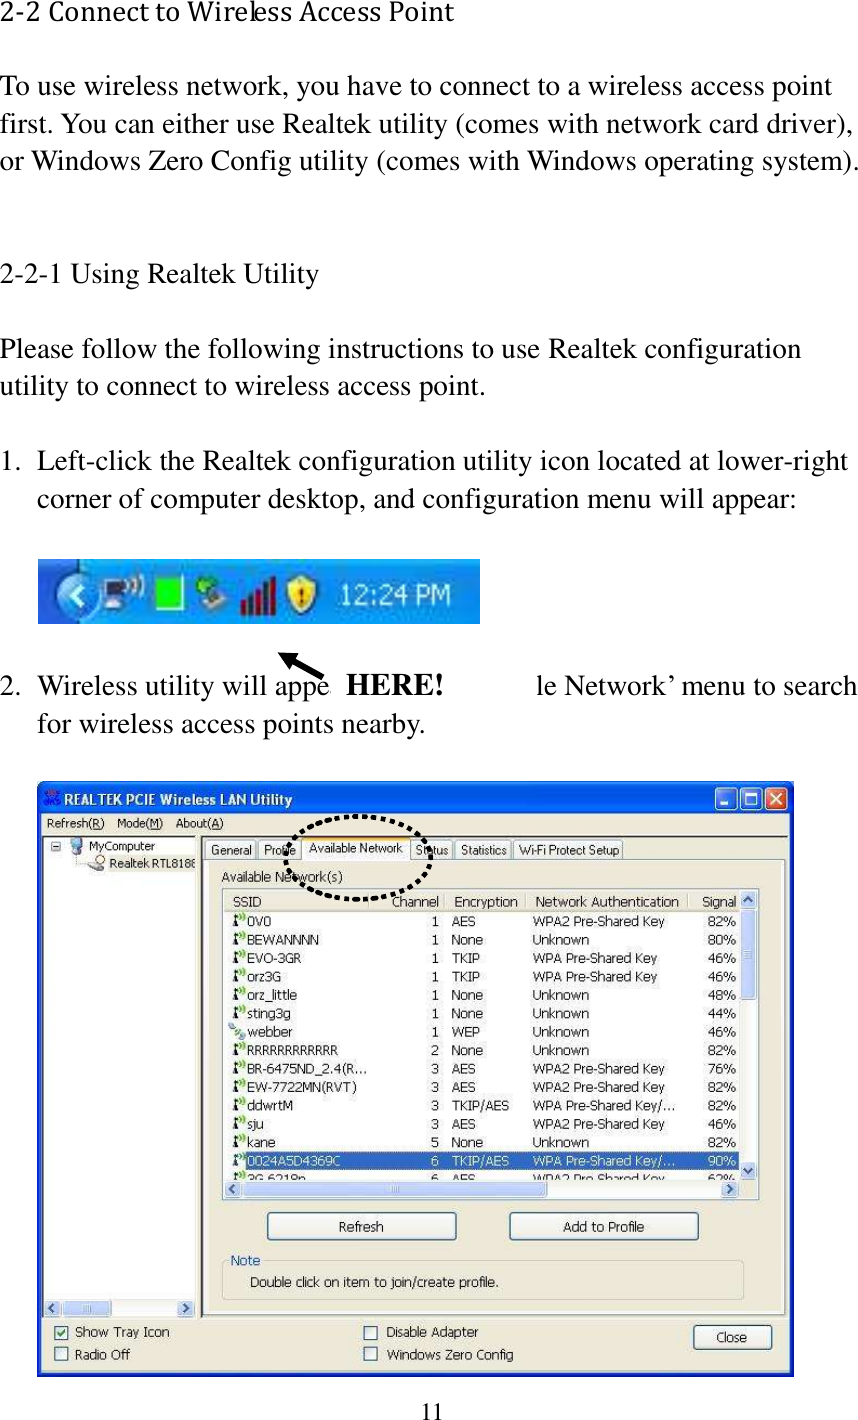 11  2-2 Connect to Wireless Access Point To use wireless network, you have to connect to a wireless access point first. You can either use Realtek utility (comes with network card driver), or Windows Zero Config utility (comes with Windows operating system).   2-2-1 Using Realtek Utility  Please follow the following instructions to use Realtek configuration utility to connect to wireless access point.    1. Left-click the Realtek configuration utility icon located at lower-right corner of computer desktop, and configuration menu will appear:    2. Wireless utility will appear. Click ‘Available Network’ menu to search for wireless access points nearby.   HERE! 